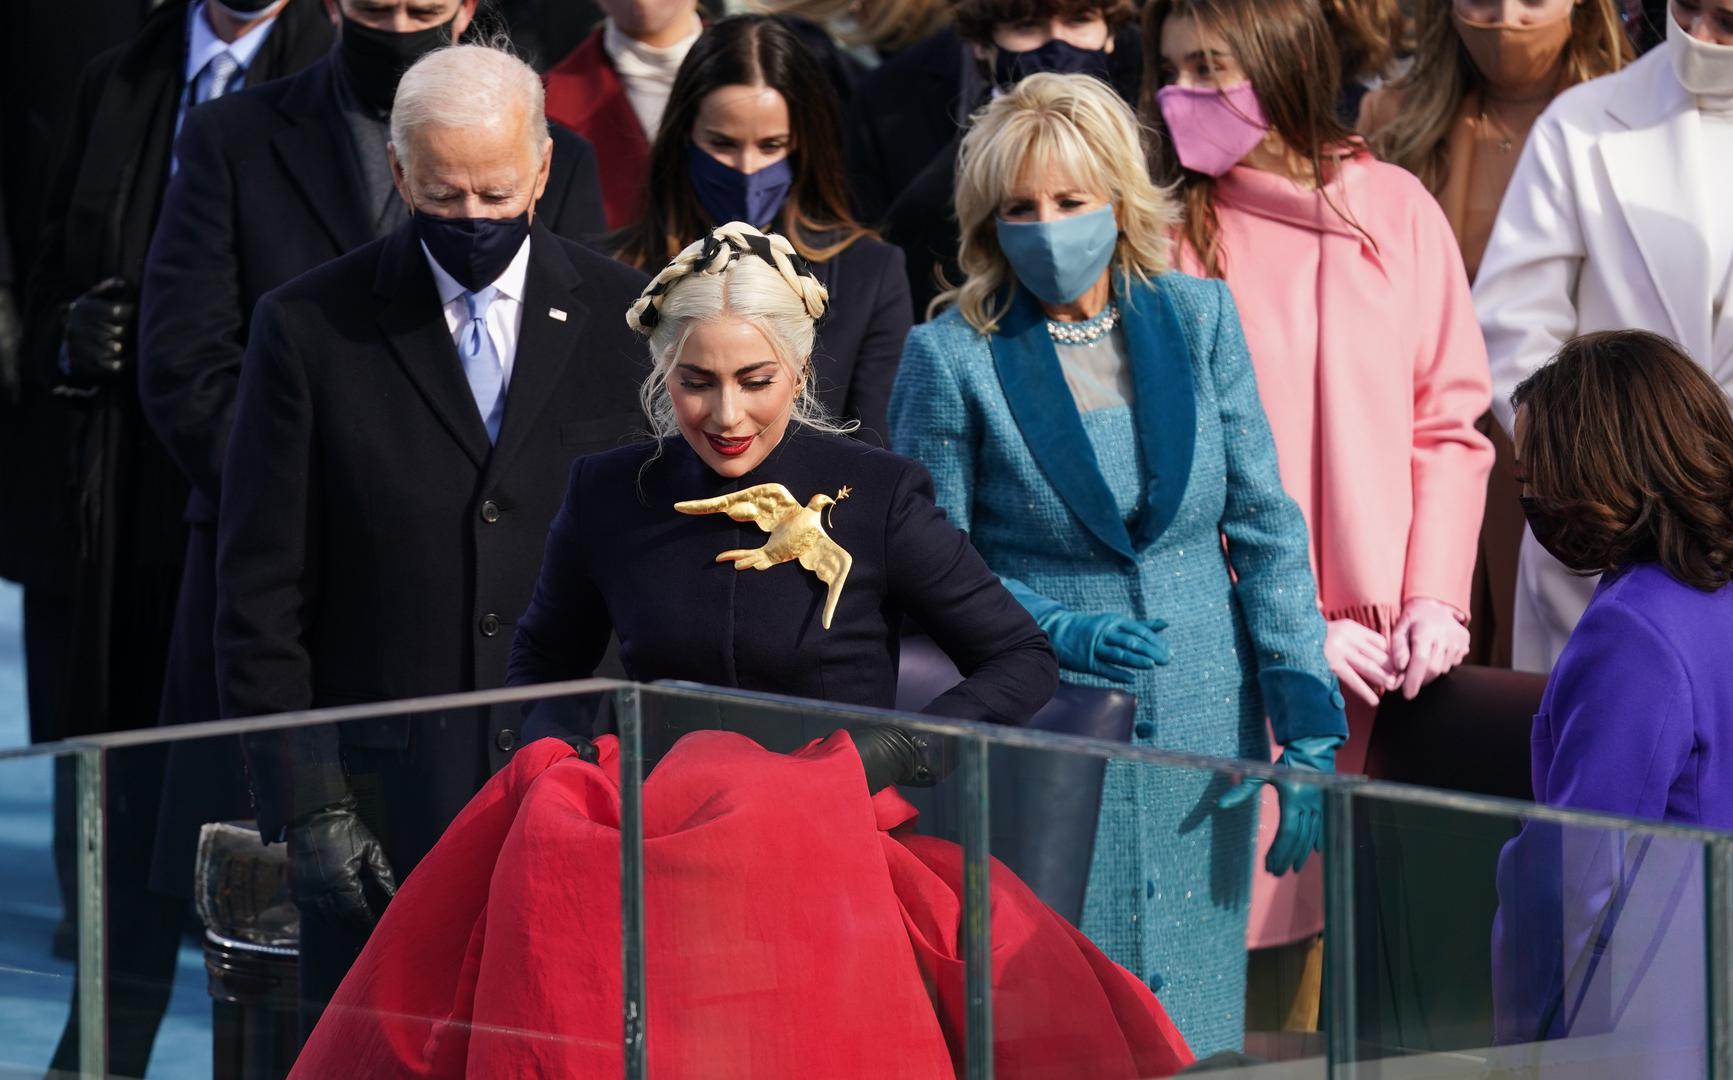 Inauguration of Joe Biden as the 46th President of the United States Lady Gaga arrives to sing the National Anthem during the inauguration of Joe Biden as the 46th President of the United States on the West Front of the U.S. Capitol in Washington, U.S., January 20, 2021. REUTERS/Kevin Lamarque KEVIN LAMARQUE